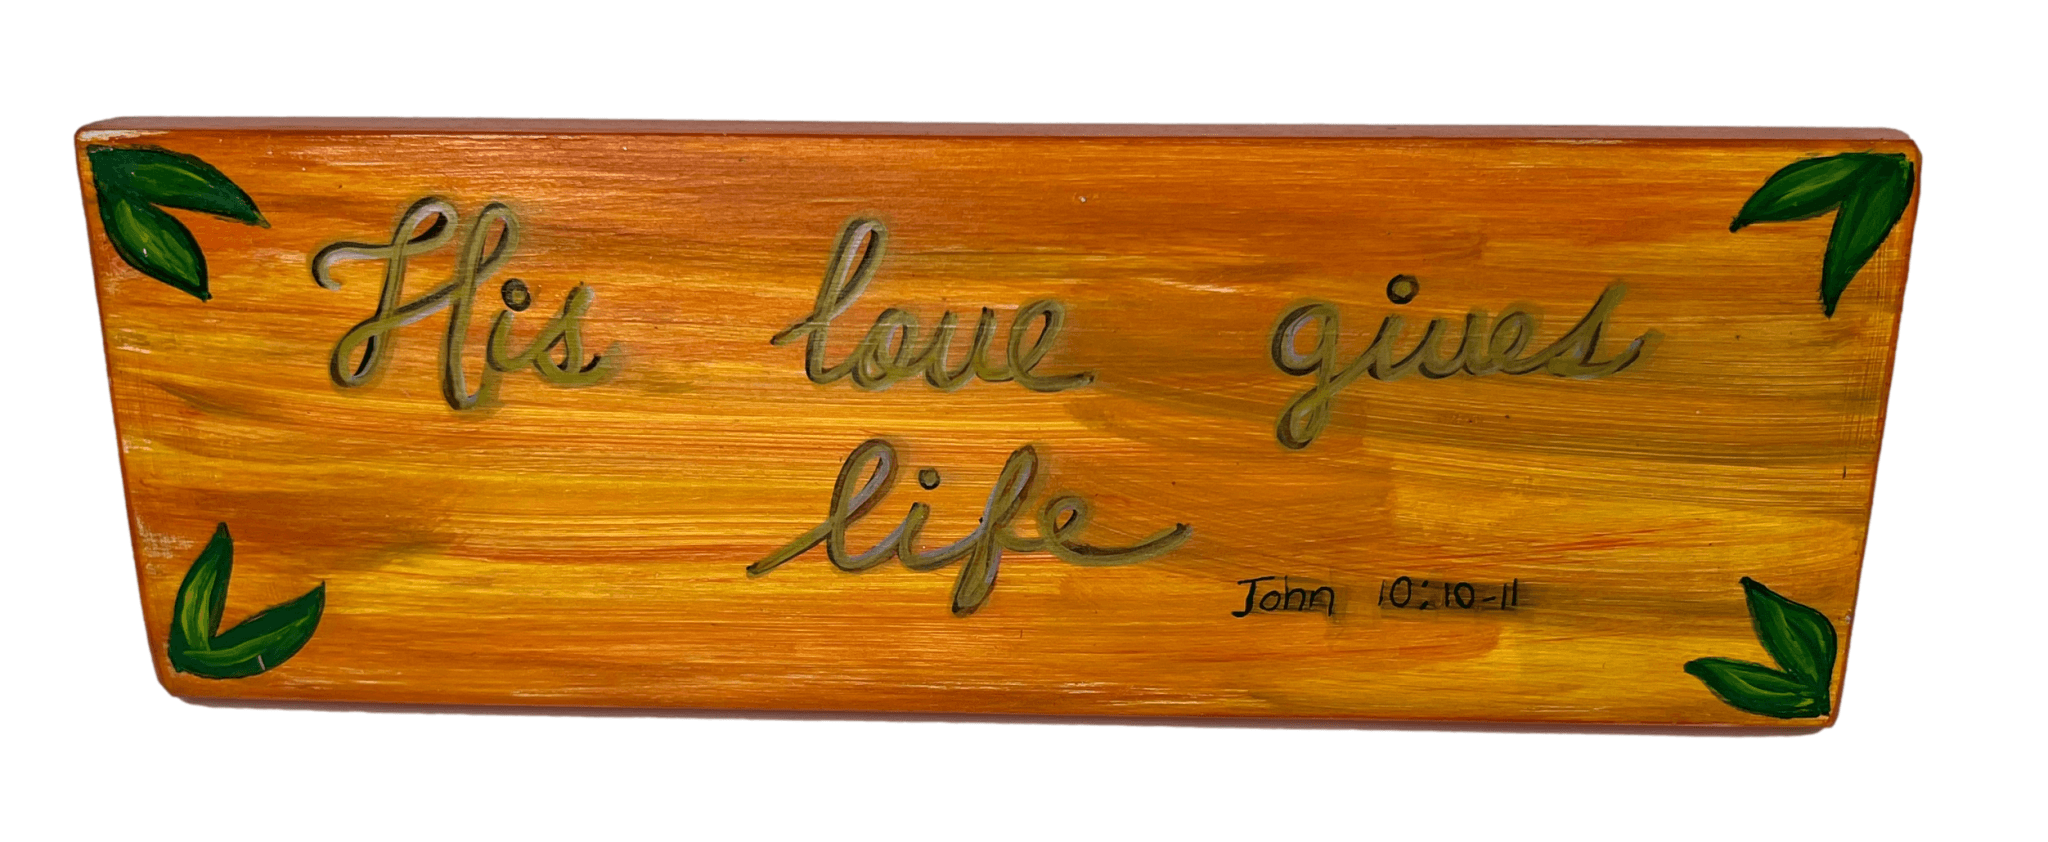 Plaque Orange "His Love Gives Life" John10:10-11 Hanging Wood Handcrafted By Local El Paso Artist L: 10.5 inches X W: 3.5 inches - Ysleta Mission Gift Shop- VOTED El Paso's Best Gift Shop